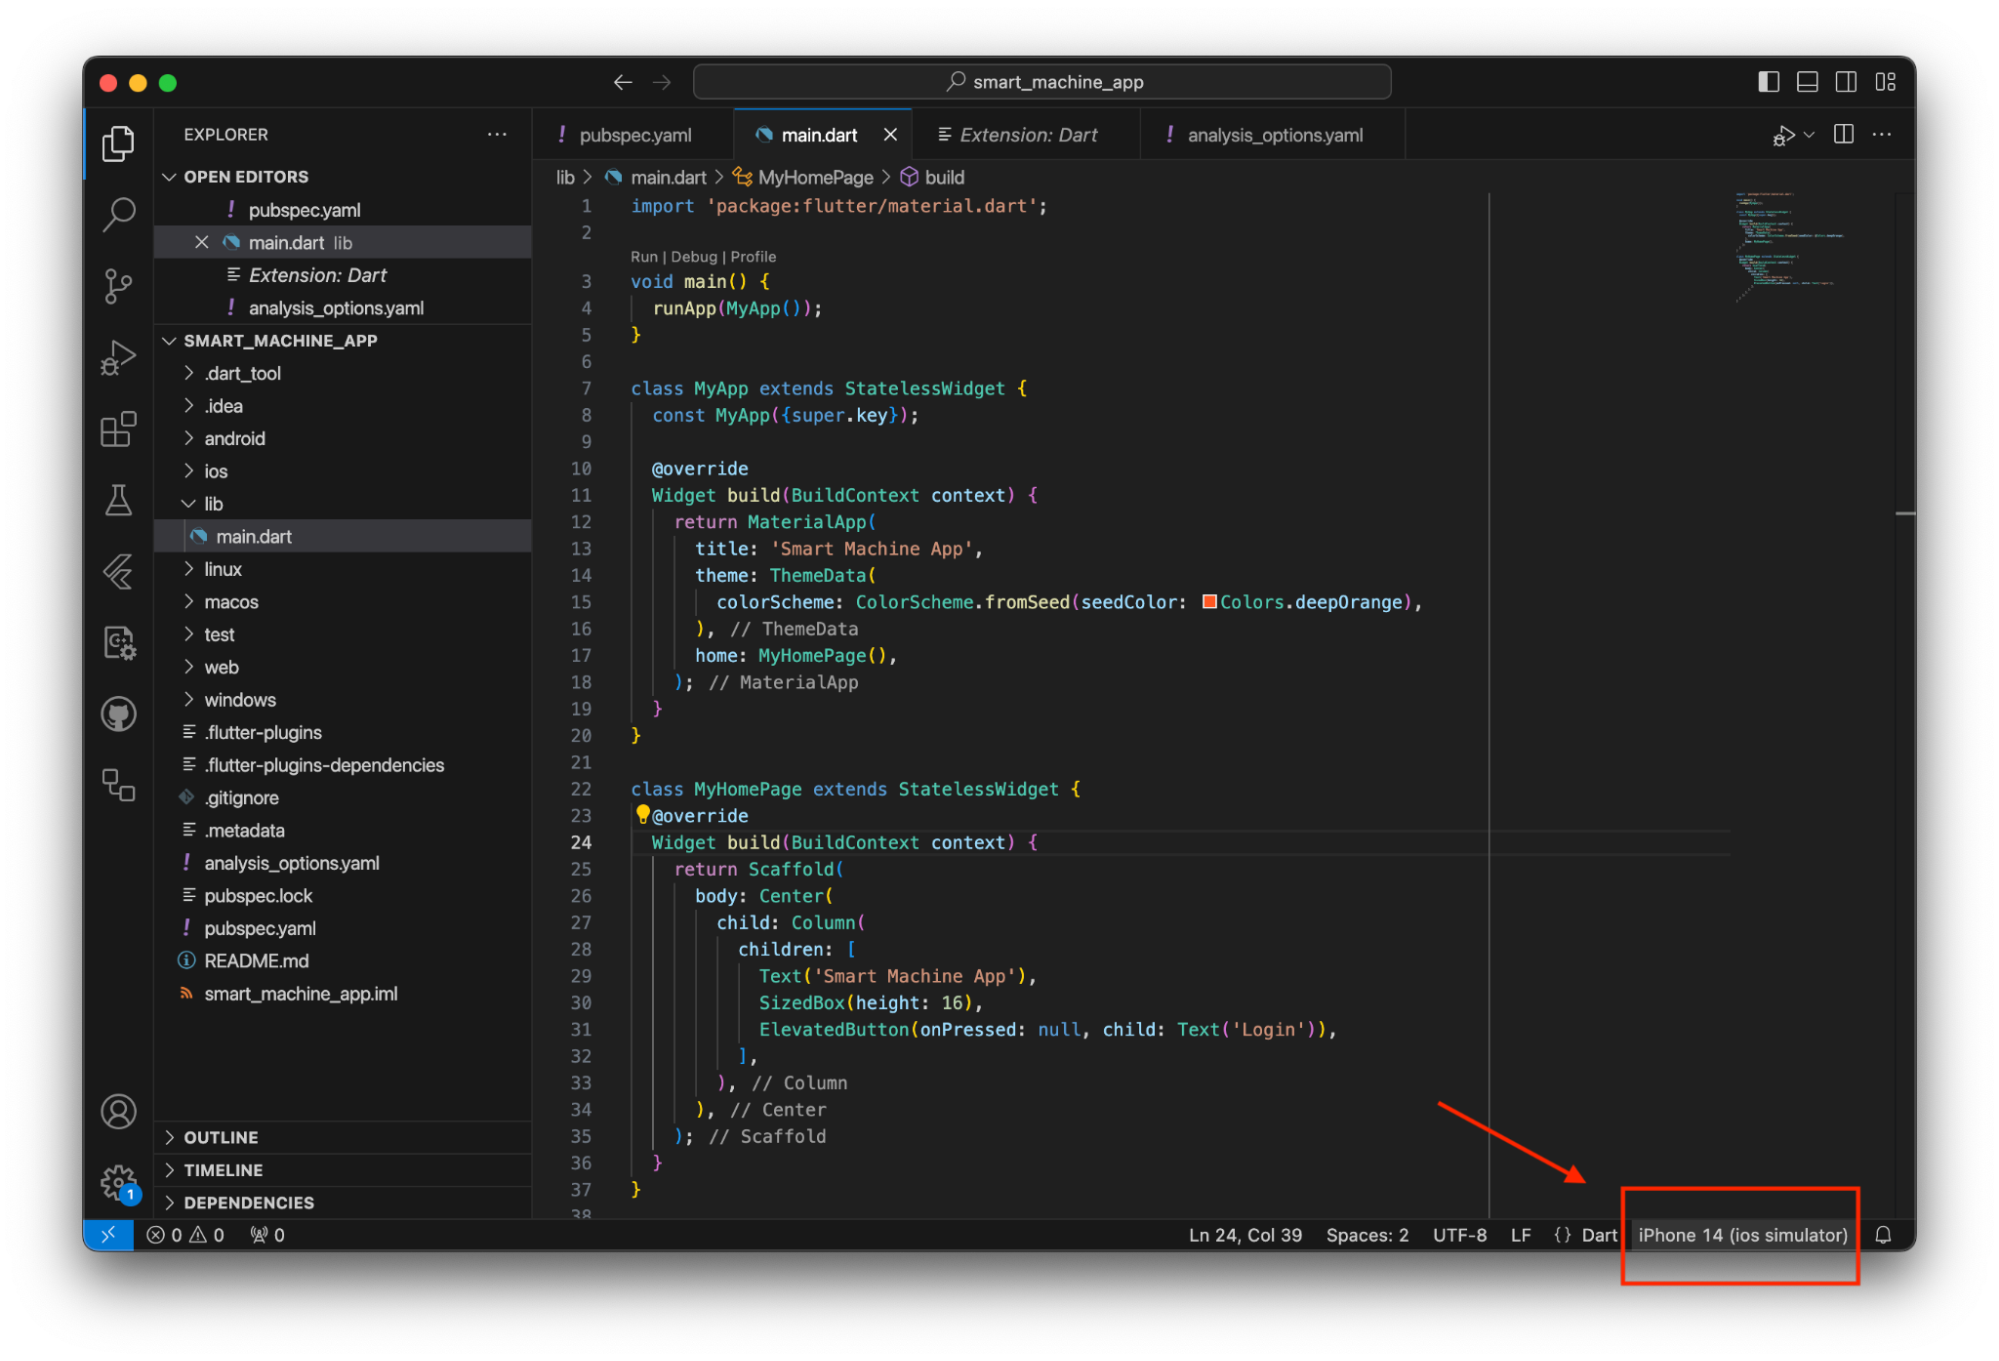 A VS Code window with main.dart open. In the bottom right corner, there is a target device button labeled 'iPhone 14 (ios simulator)'.